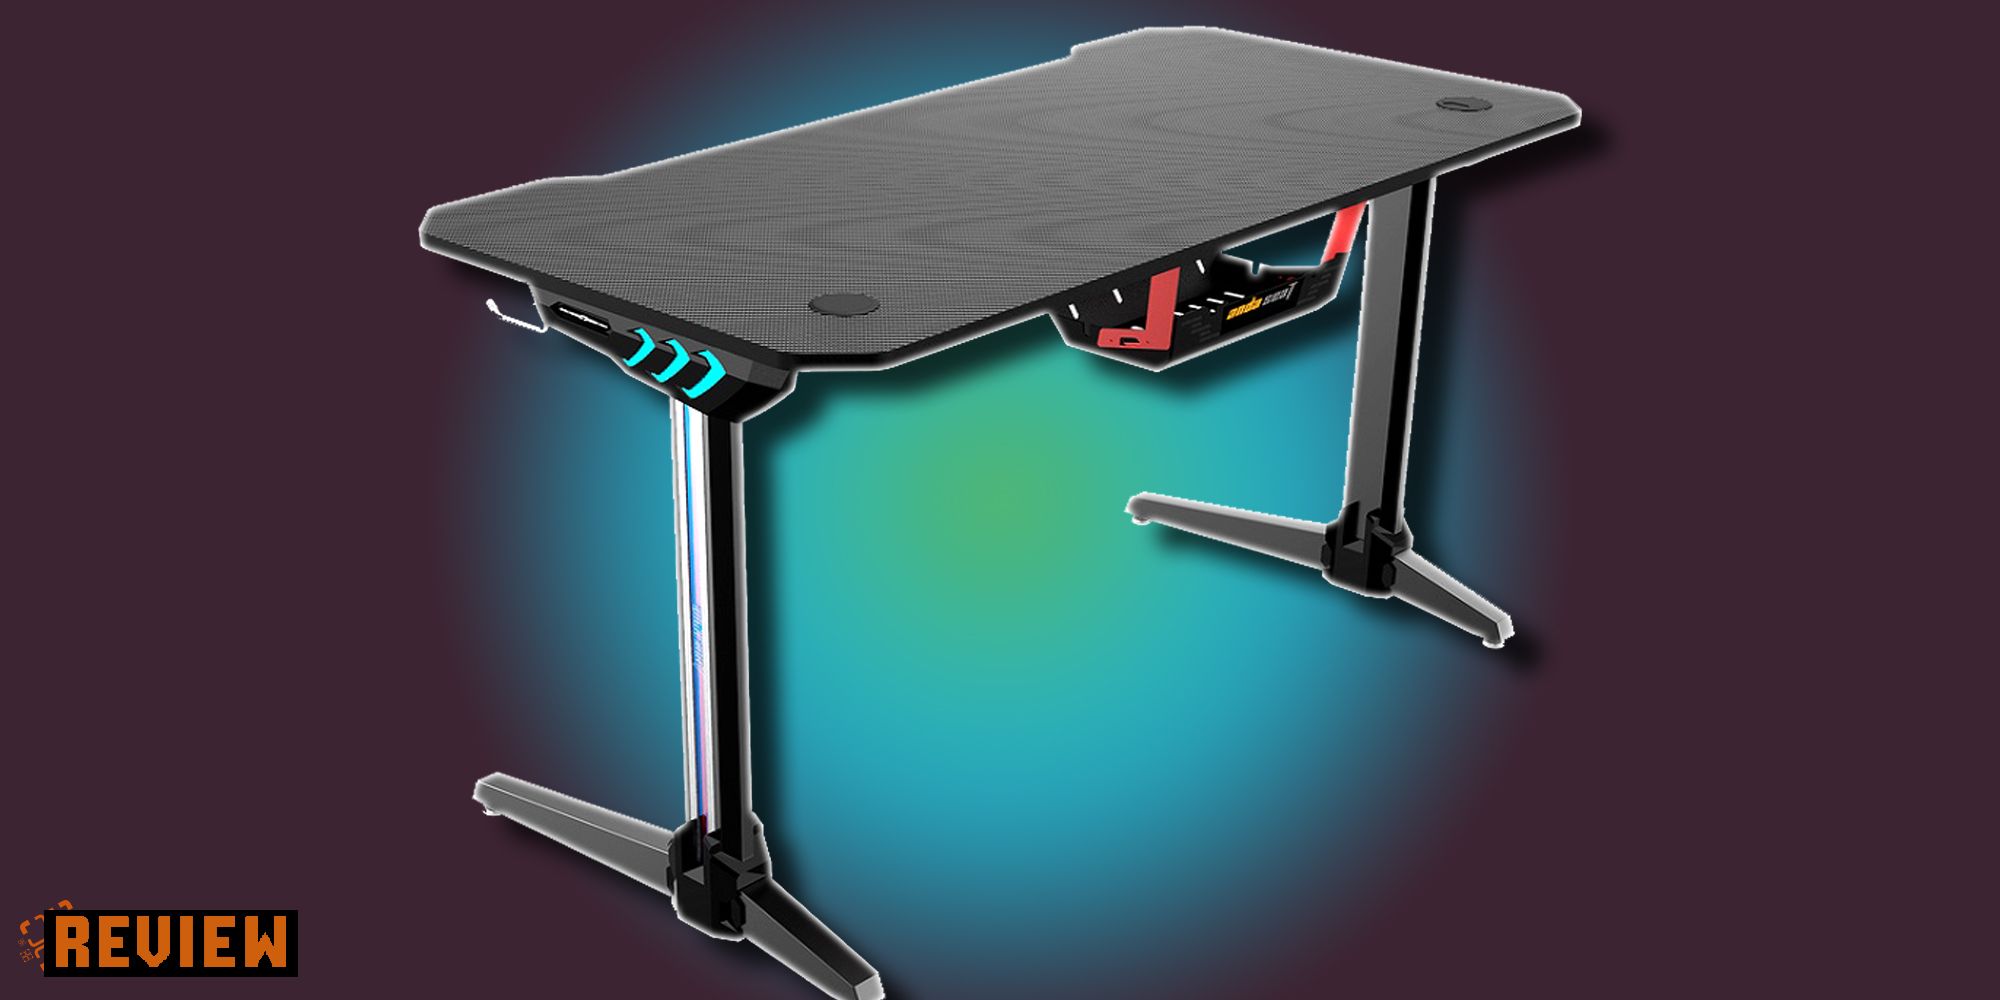 Product image of the Anda Seat Mask 2 Computer Table.